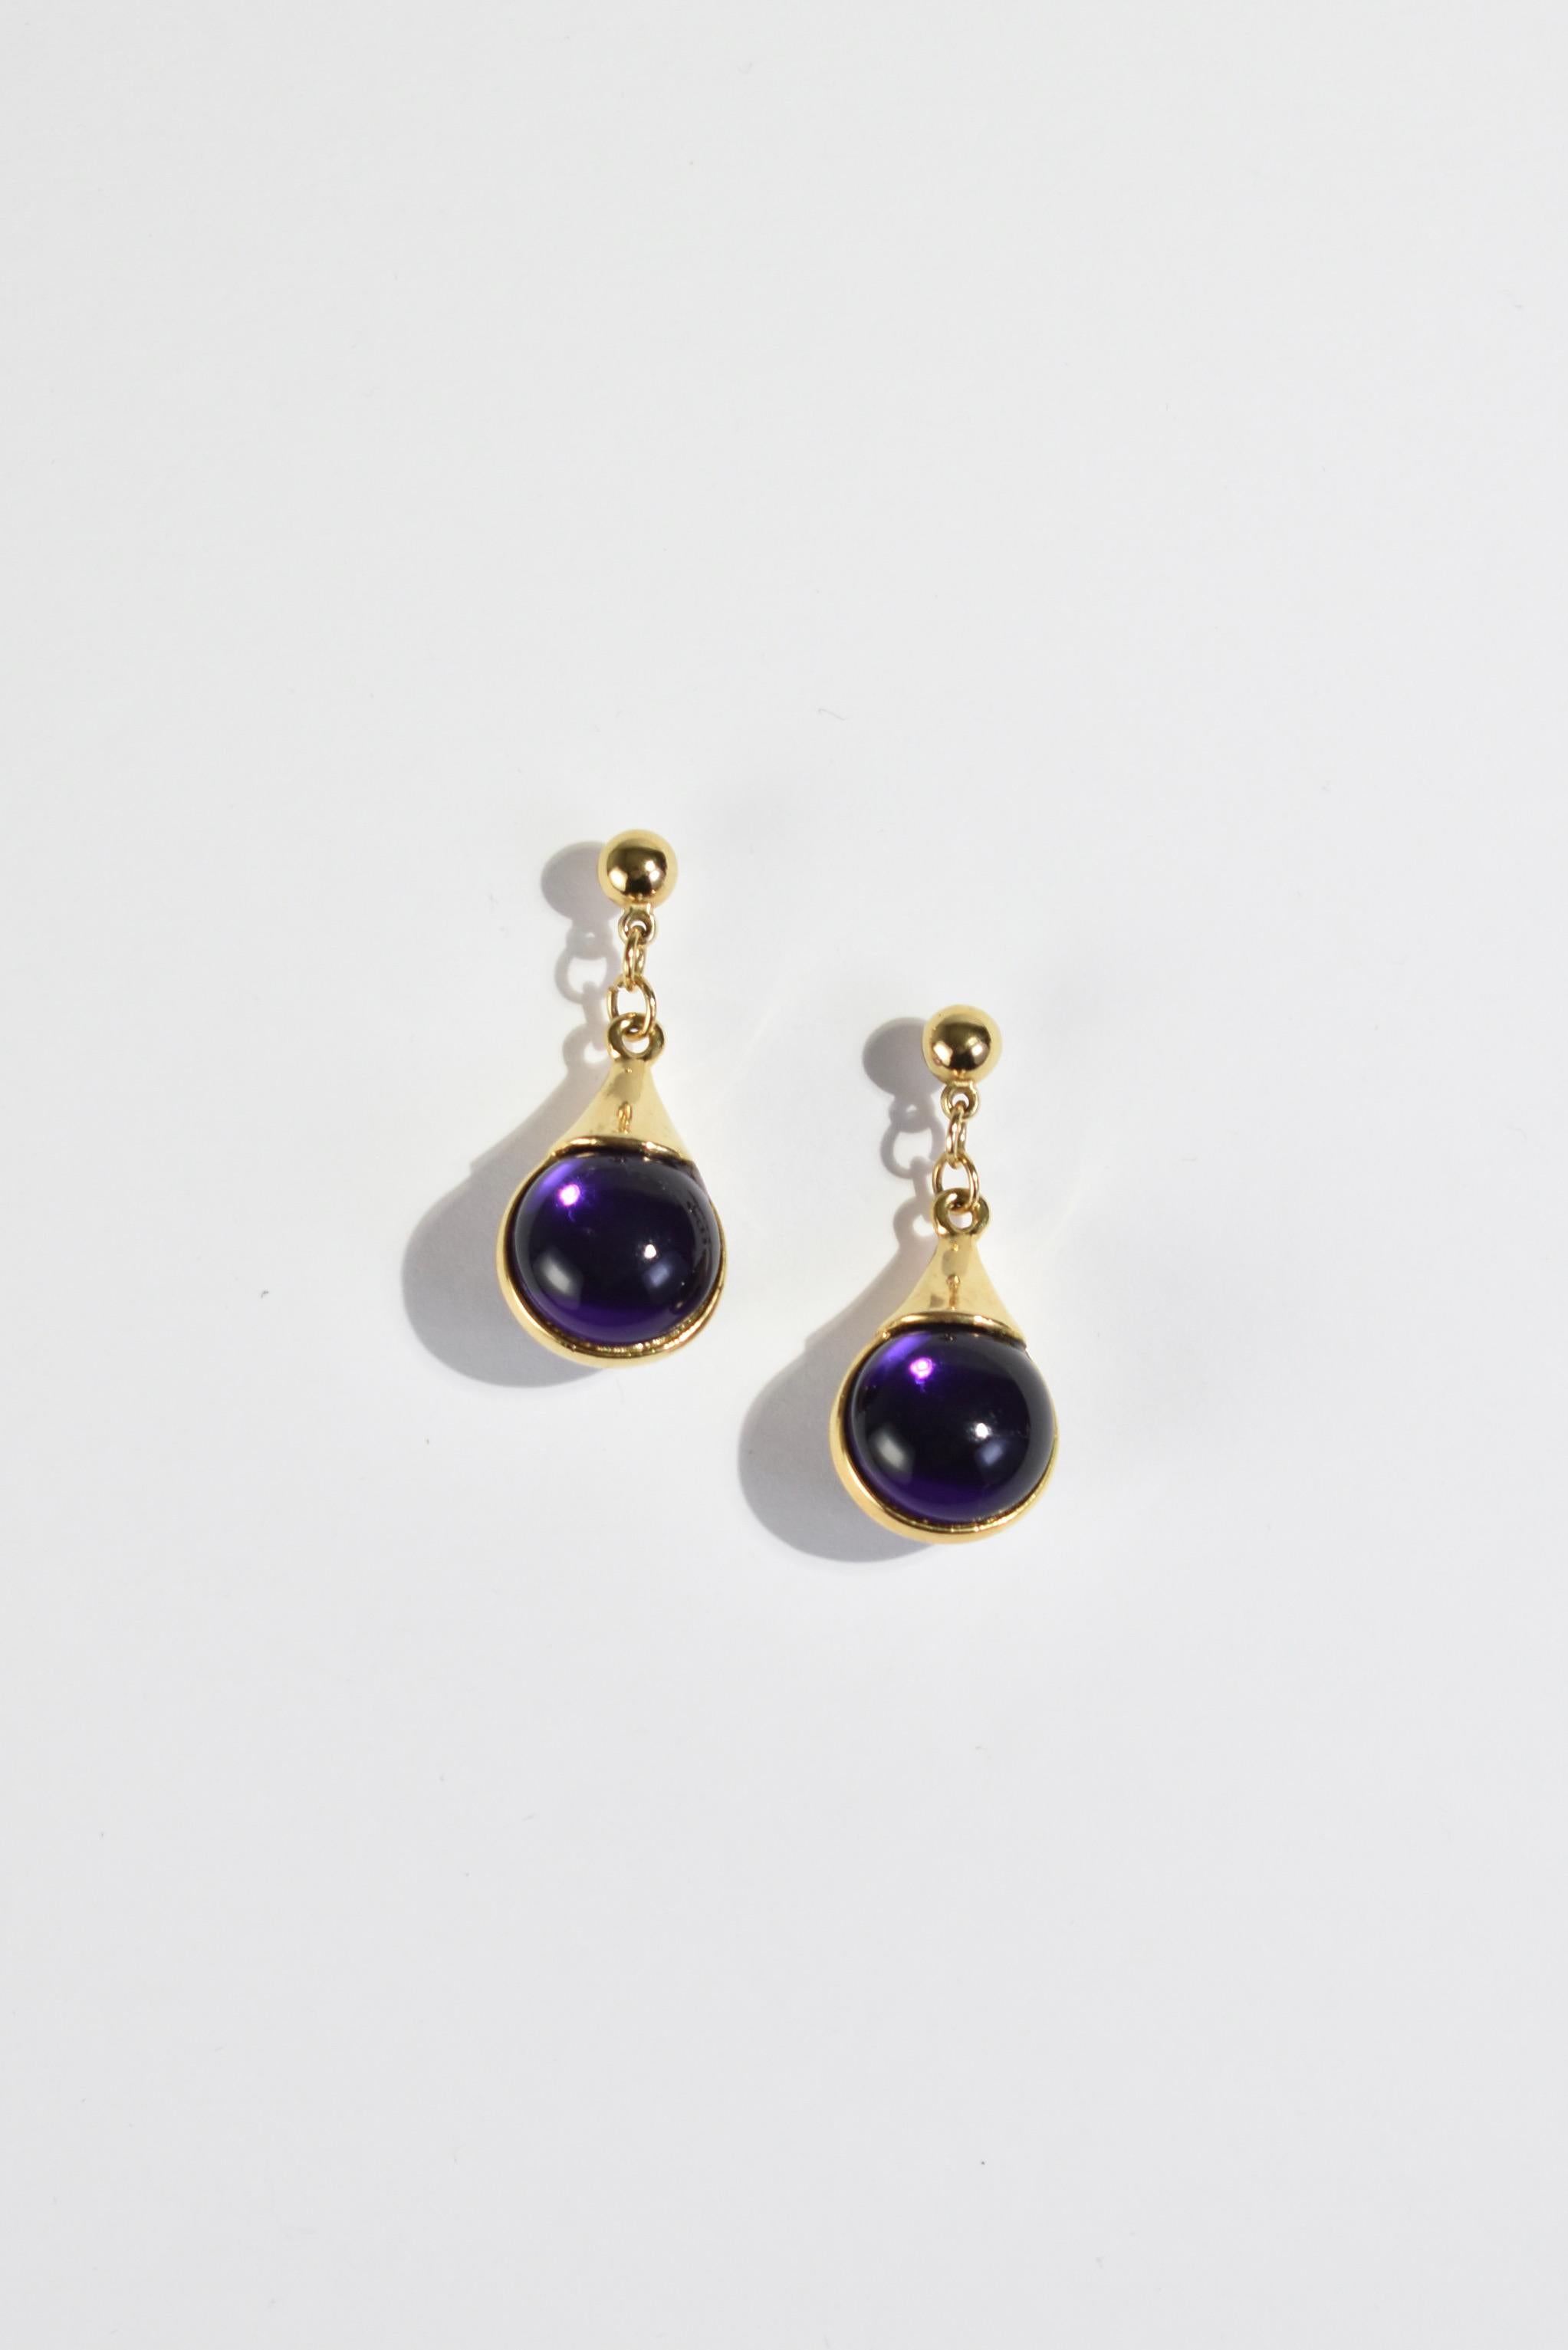 Vintage gold tone earrings with purple sphere glass drop detail, pierced.

Material: Metal, glass.

